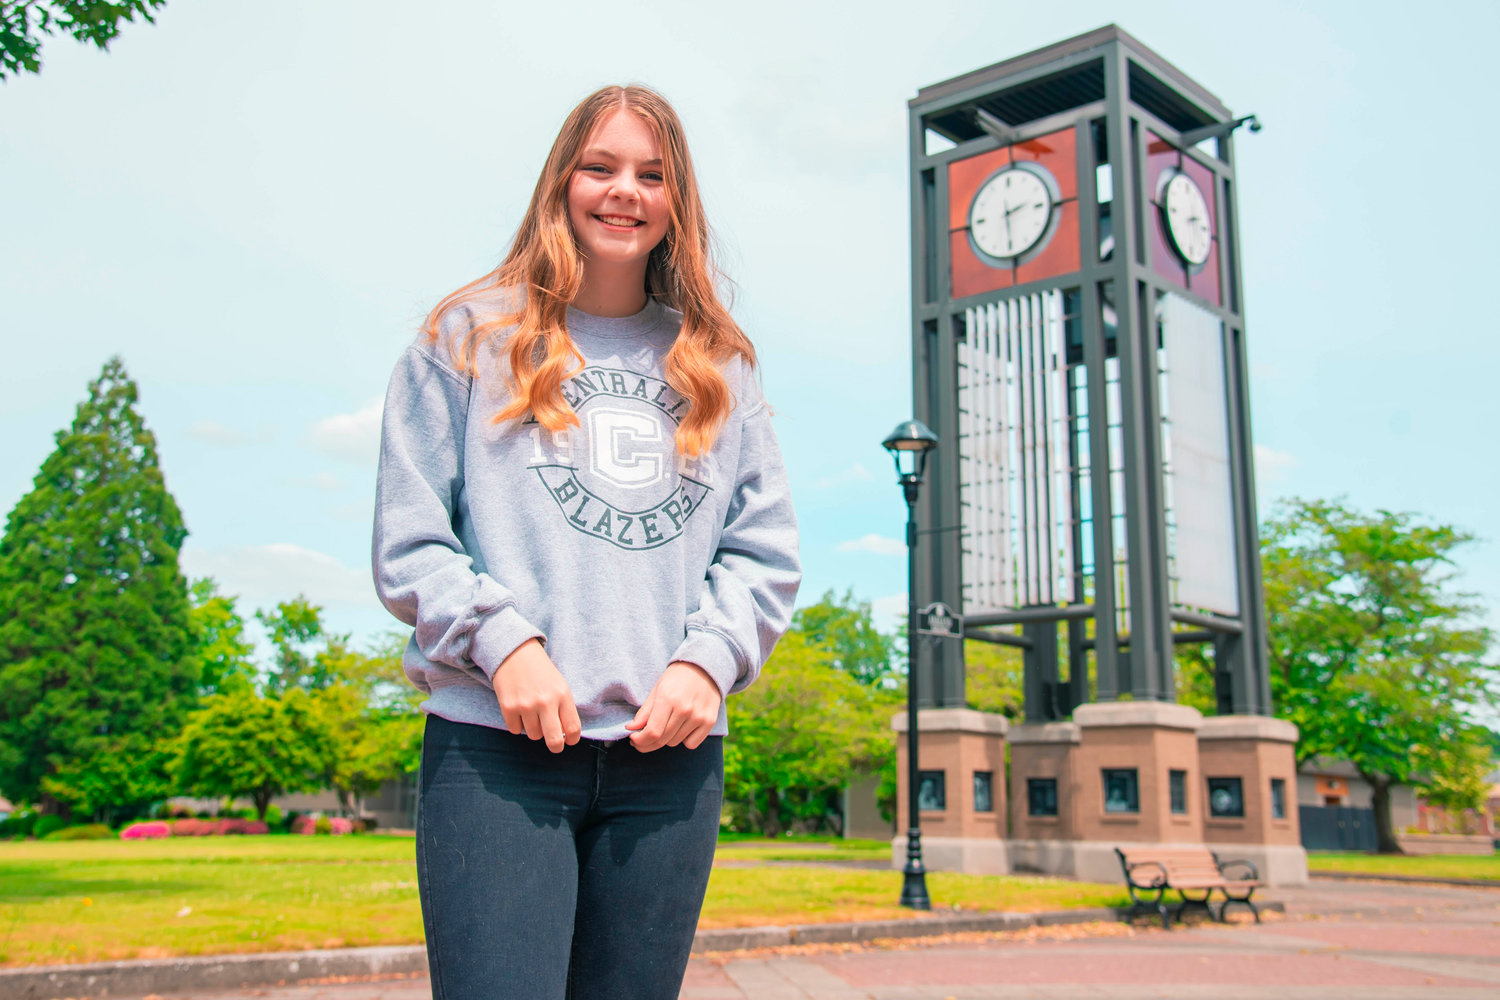 Maddy Casper smiles and poses for a photo in front of the clock tower at Centralia College last week.